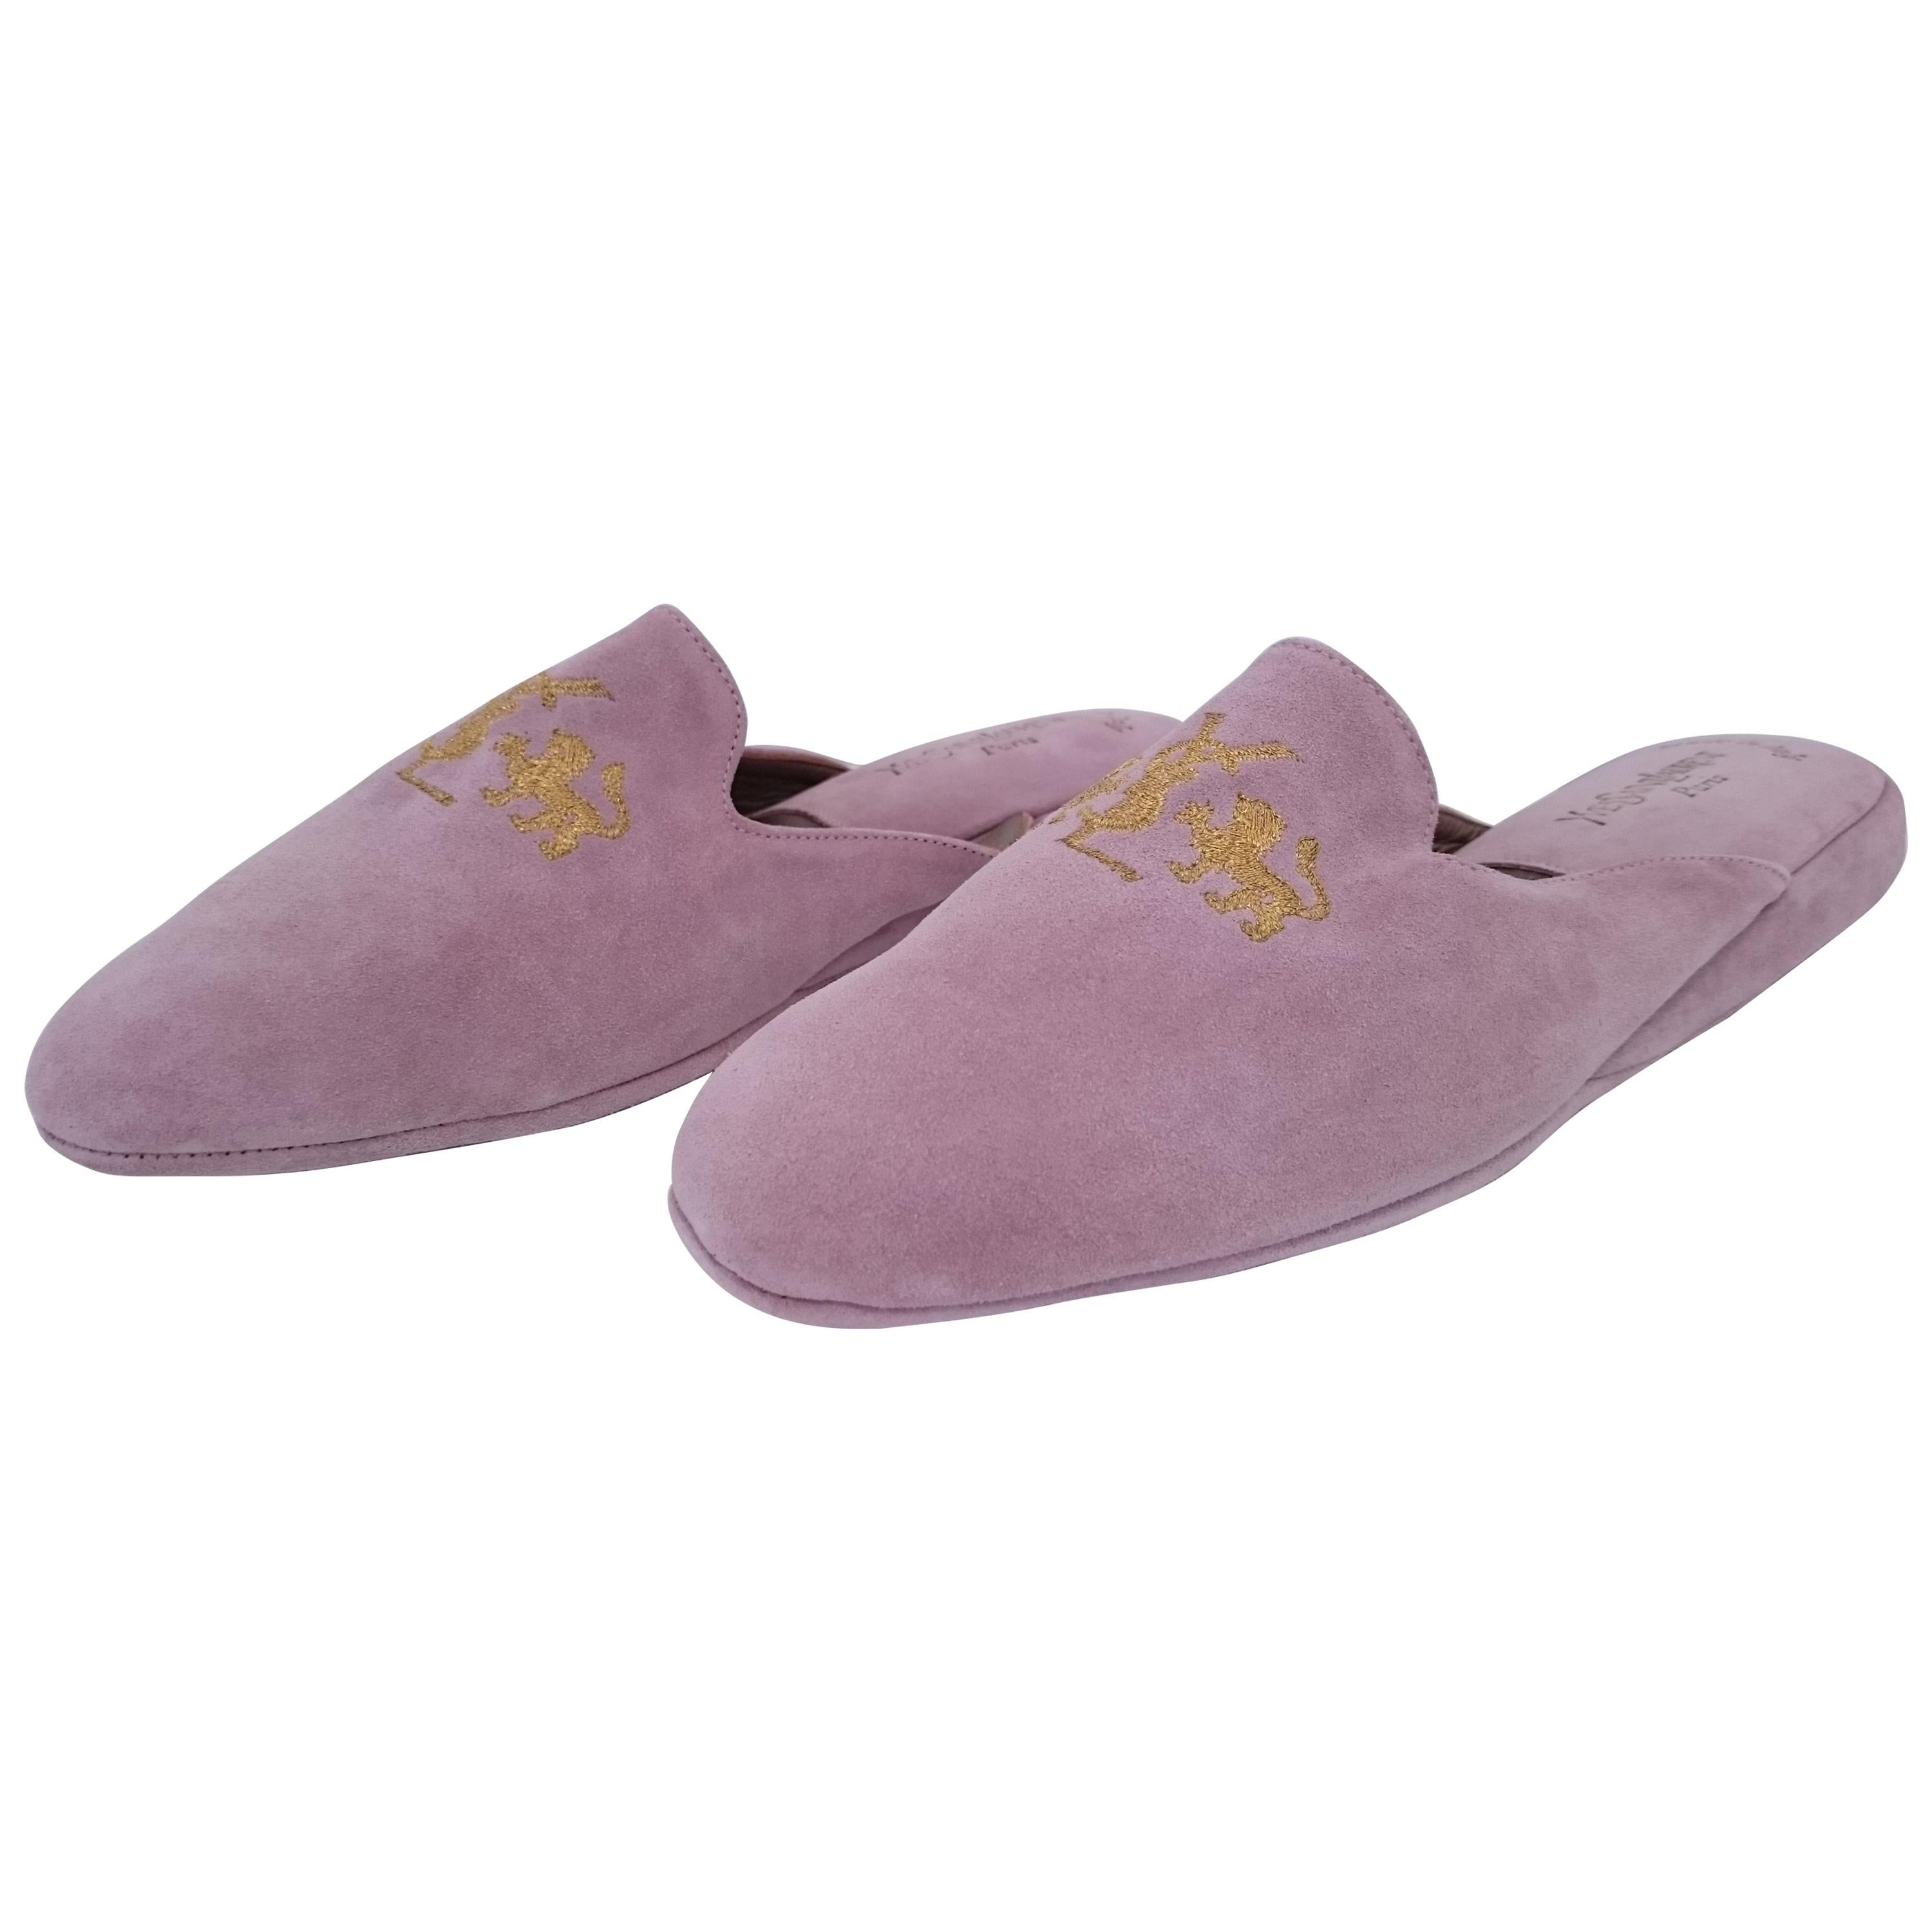 Yves Saint Laurent Pink Suede Slippers for Home. NEW. Size 10 1/2  im Angebot